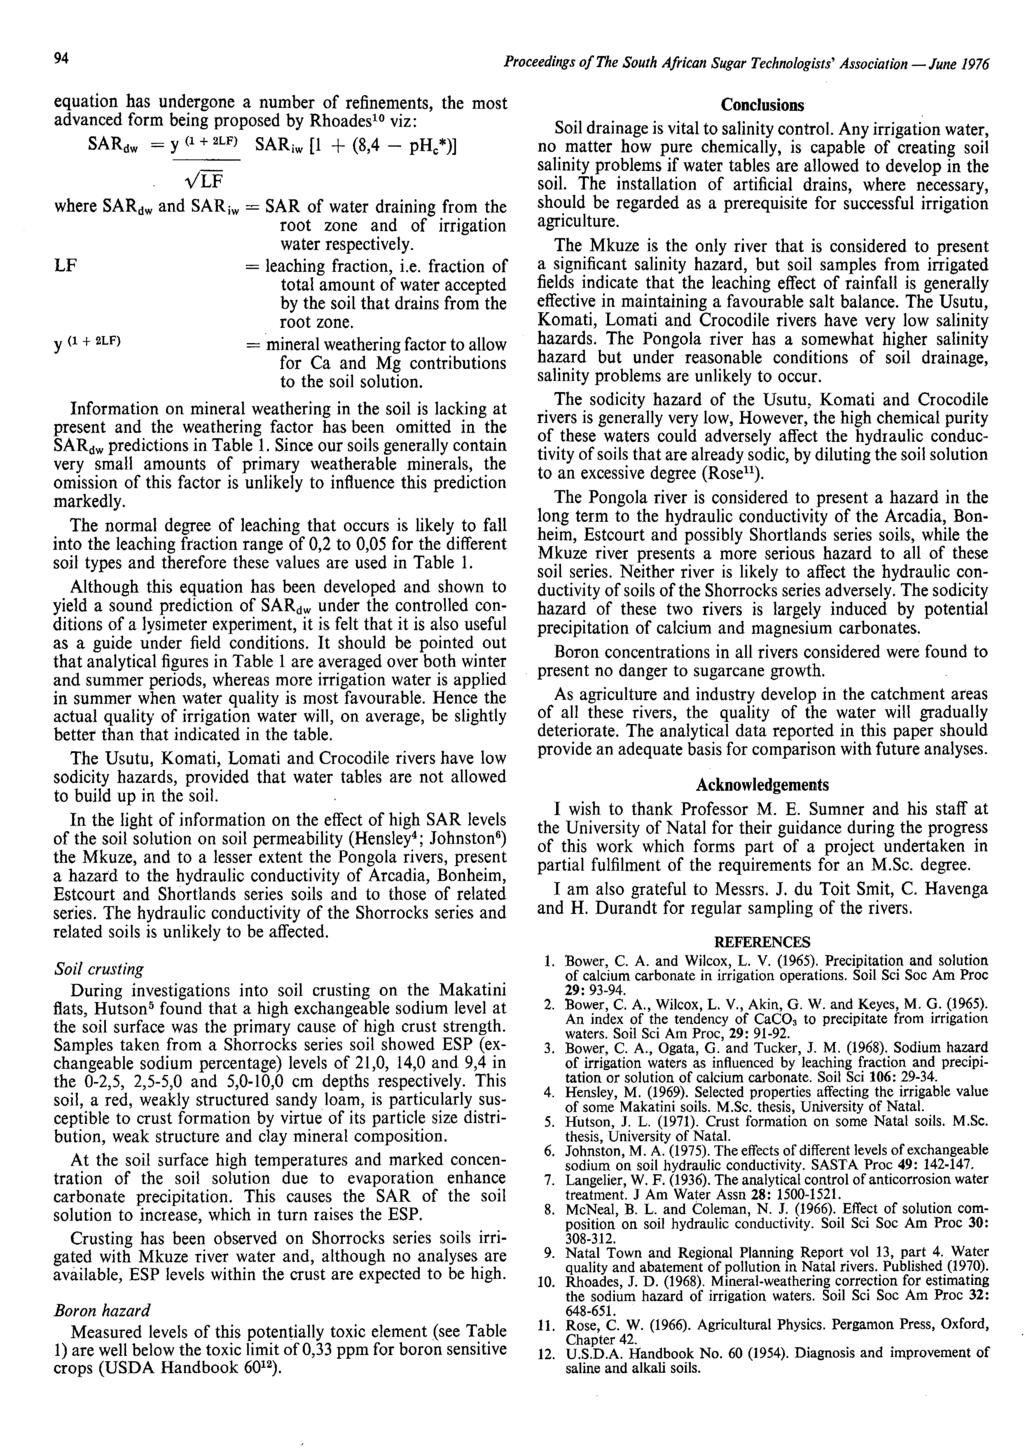 reedings of The South African Sugar Technologists' Association June 1976 equation has undergone a number of refinements, the most advanced form being proposed by Rhoades1 viz: SARdw = JJ (l+ 2LF)